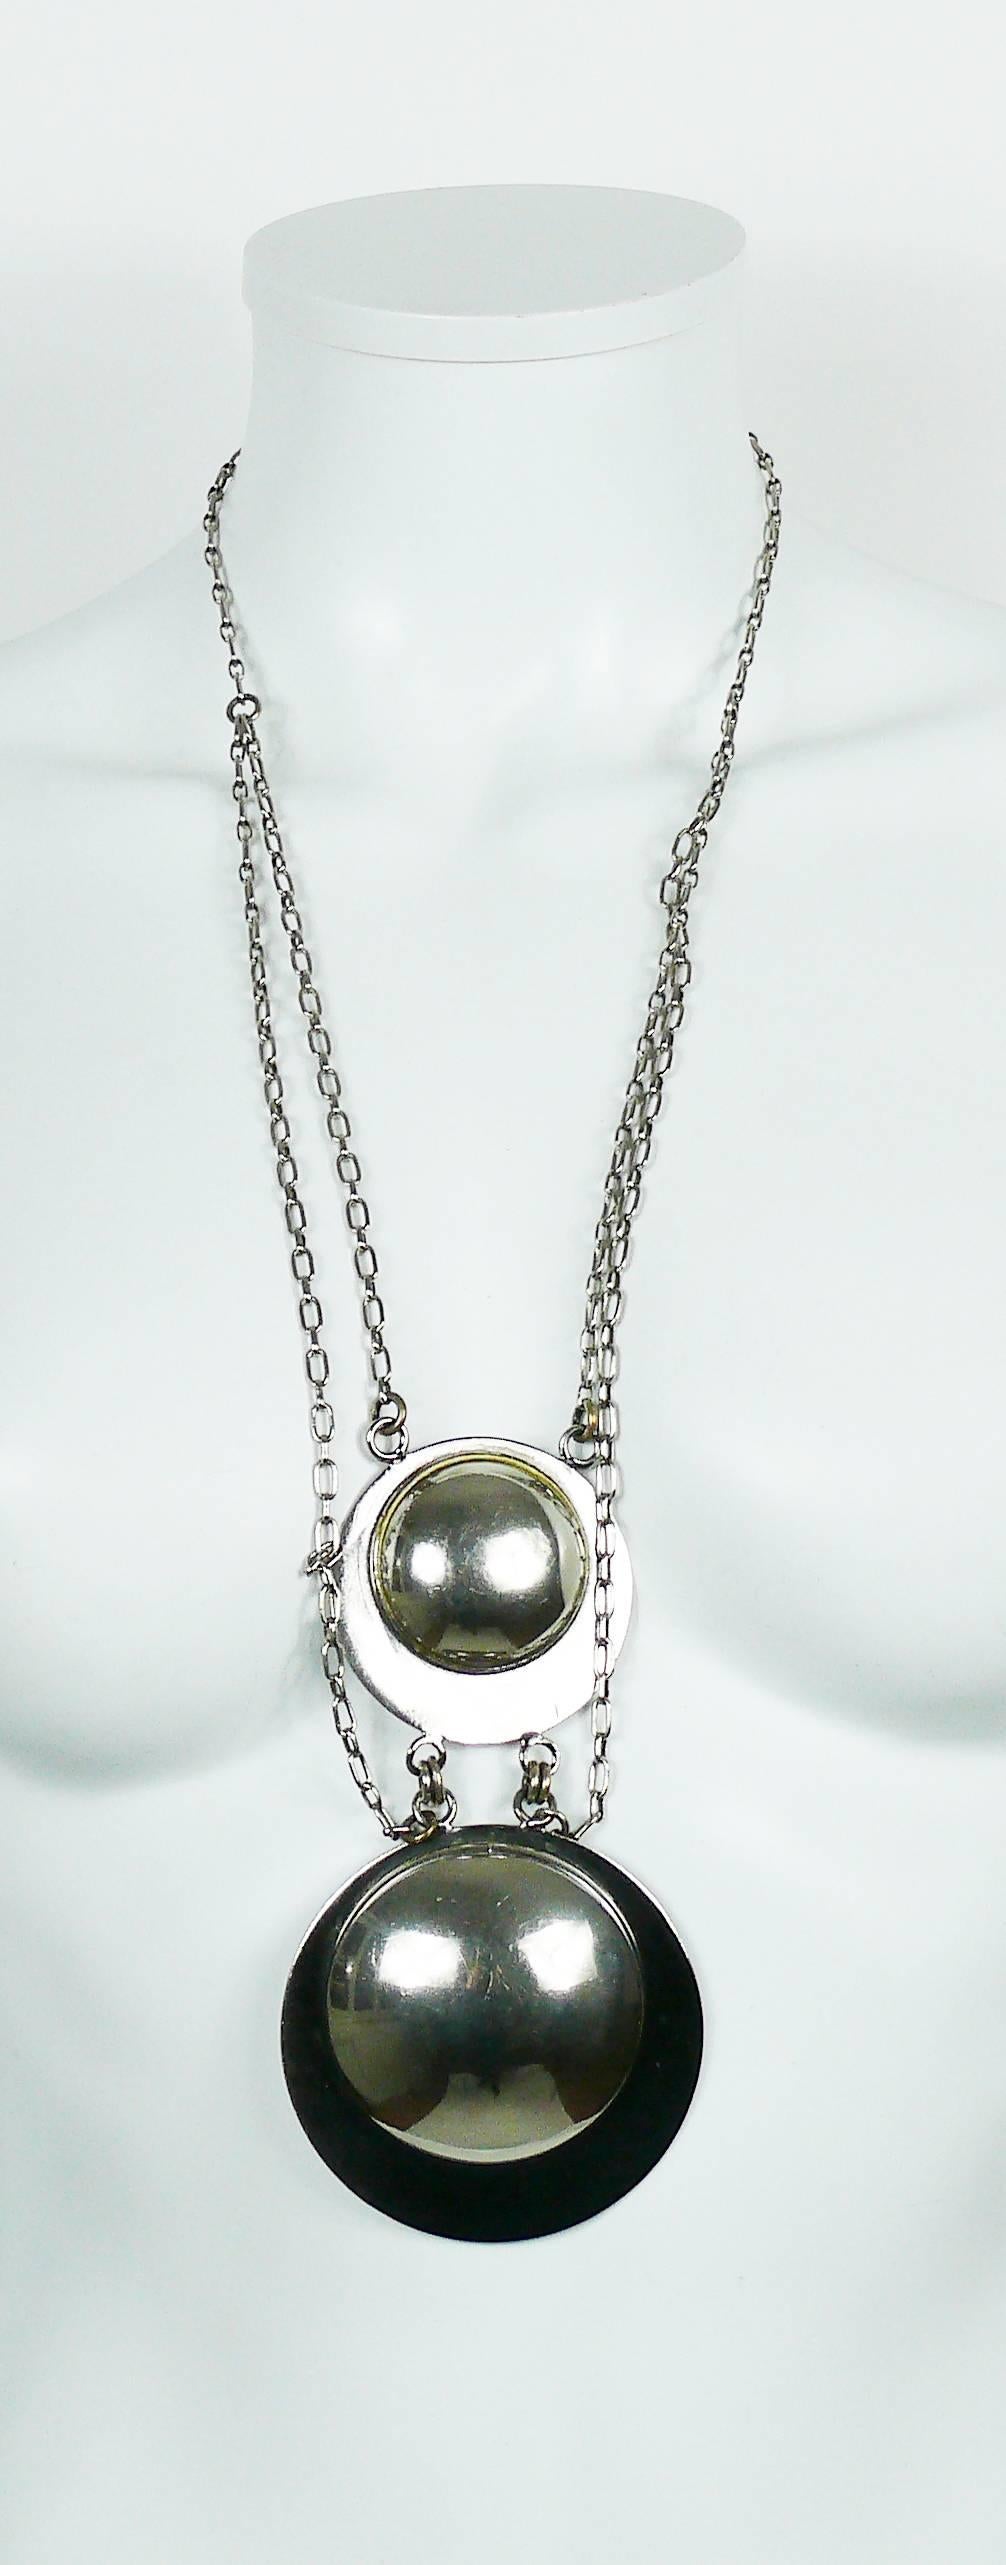 PIERRE CARDIN vintage rare silver toned modernist necklace featuring two 3-dimensional disc pendants.

Spring clasp closure.

Embossed PIERRE CARDIN.

Indicative measurements : chain total length approx. 66 cm (25.98 inches) / large disc diameter